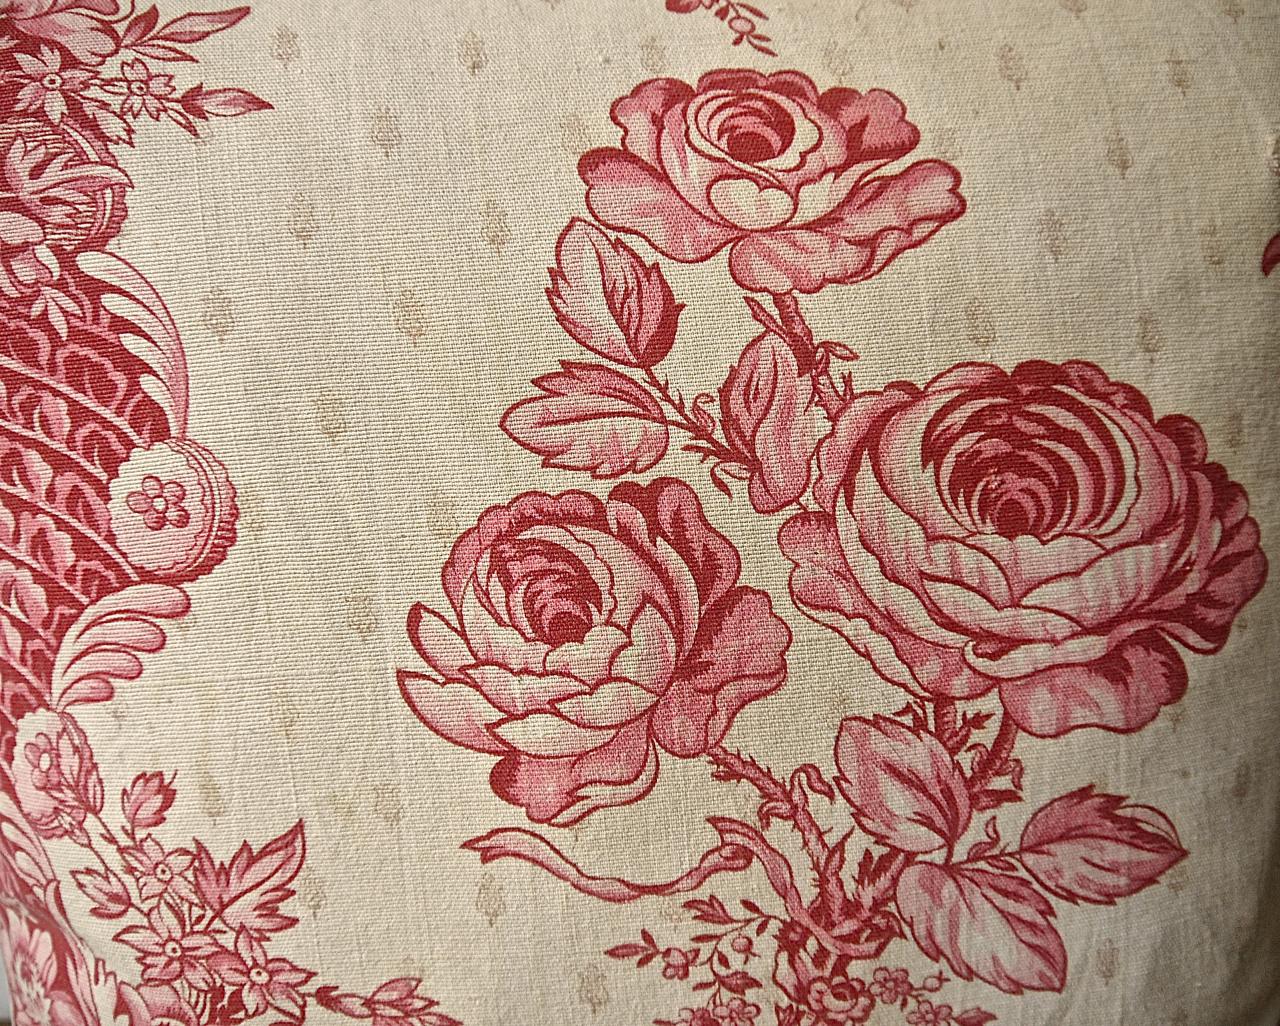 French later 19th century cushion printed with a design based on an 18th century original. Pretty blowsy raspberry red and pink roses gathered with a ribbon alternating with twisting columns of flowers against a faintly motif printed ground. With